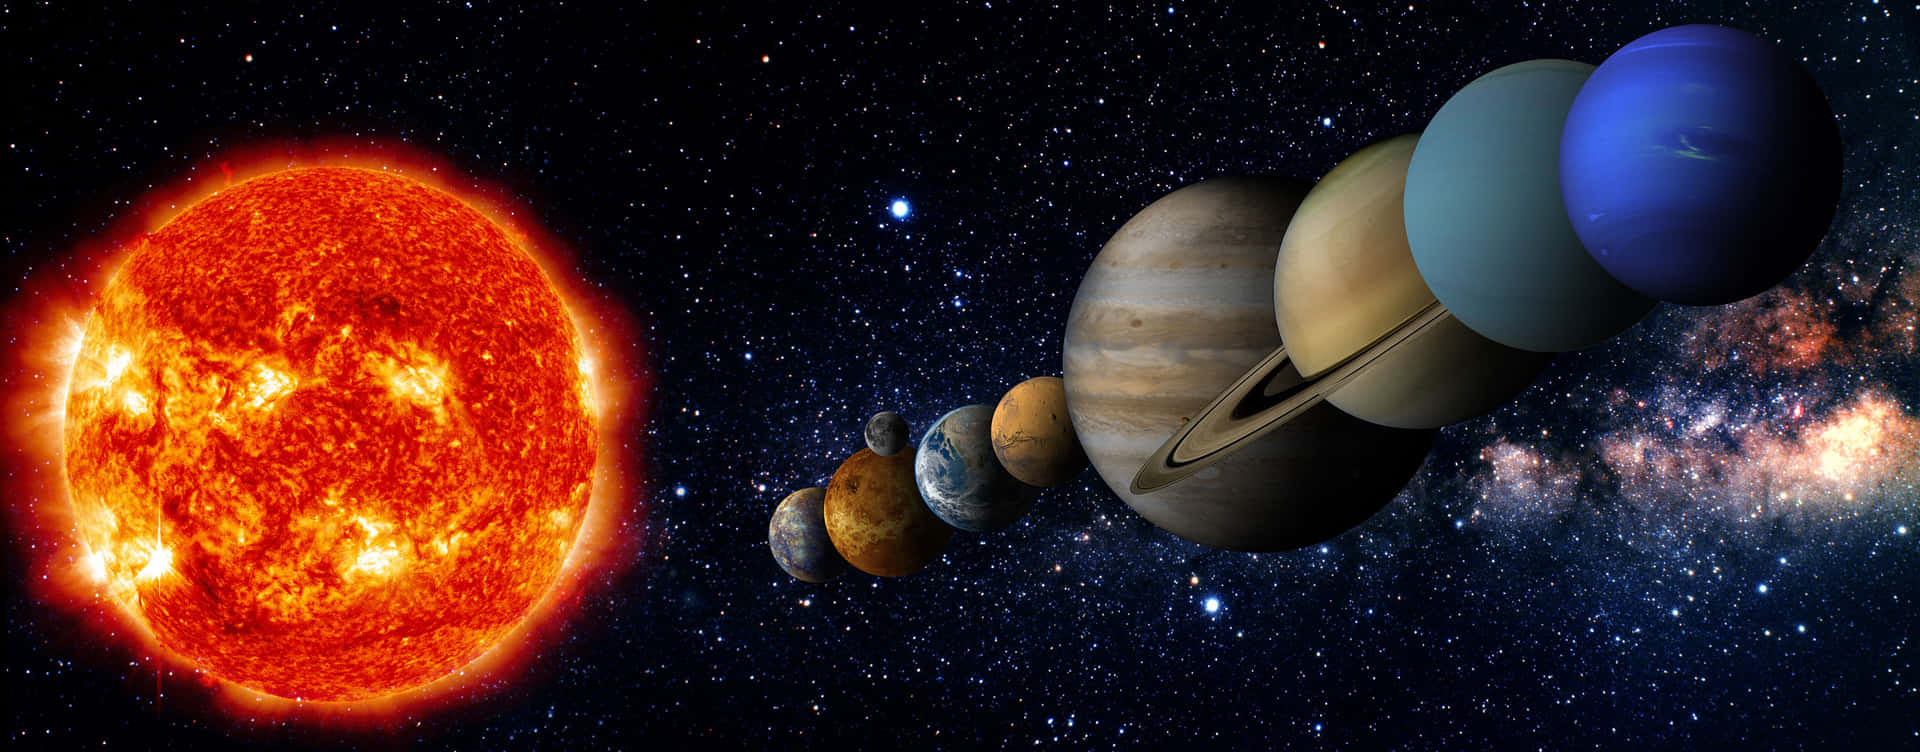 Planets Lined Up In The Solar System Picture